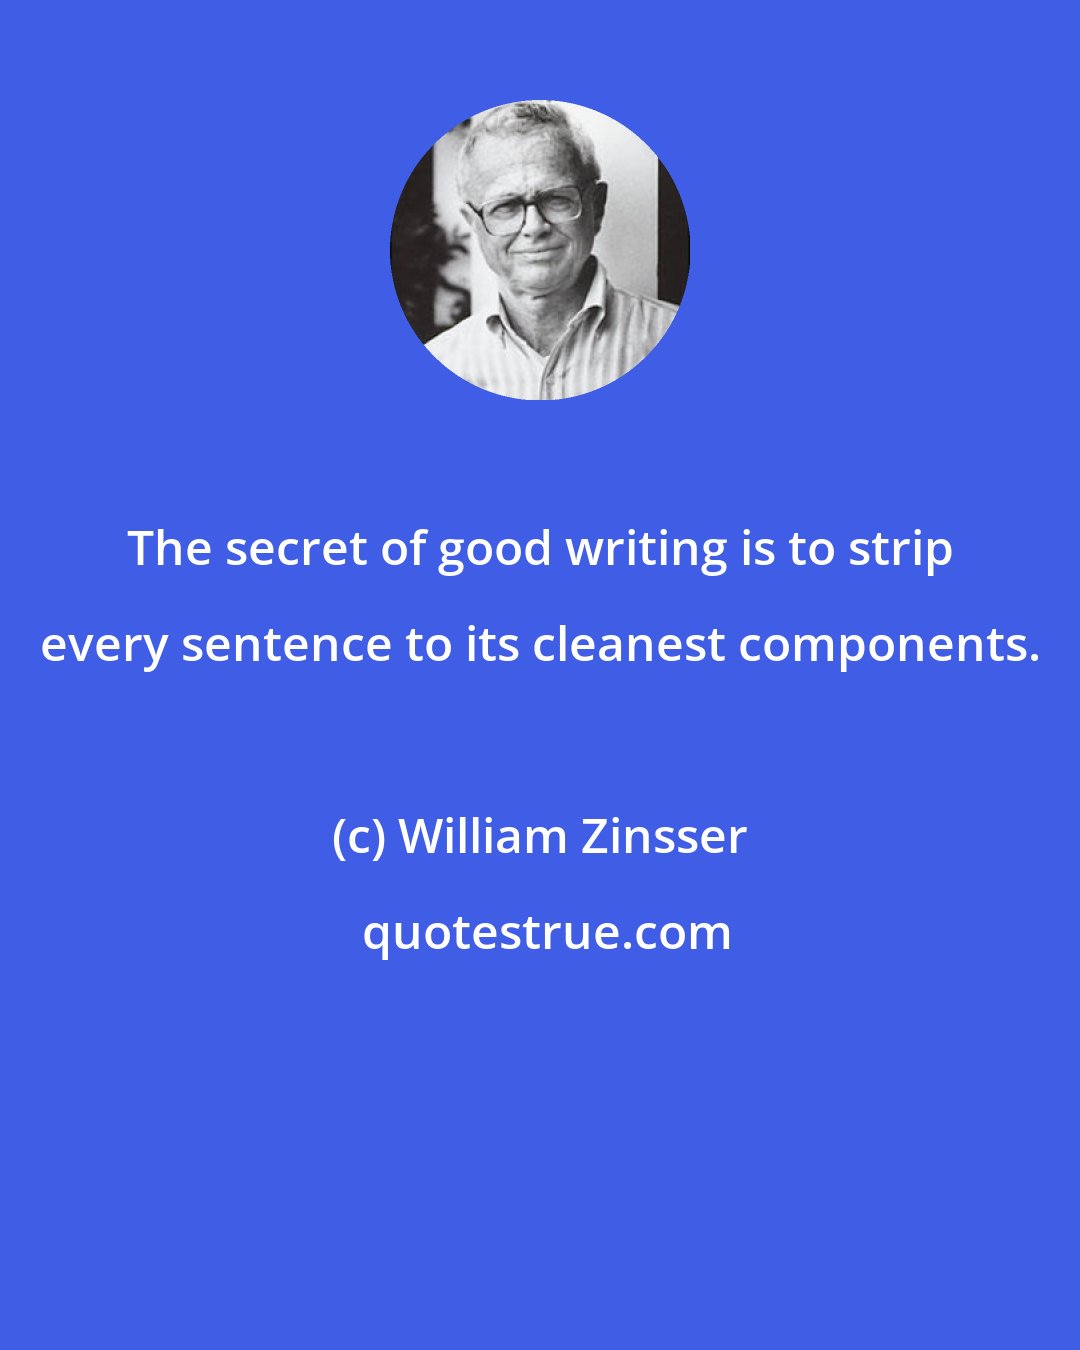 William Zinsser: The secret of good writing is to strip every sentence to its cleanest components.